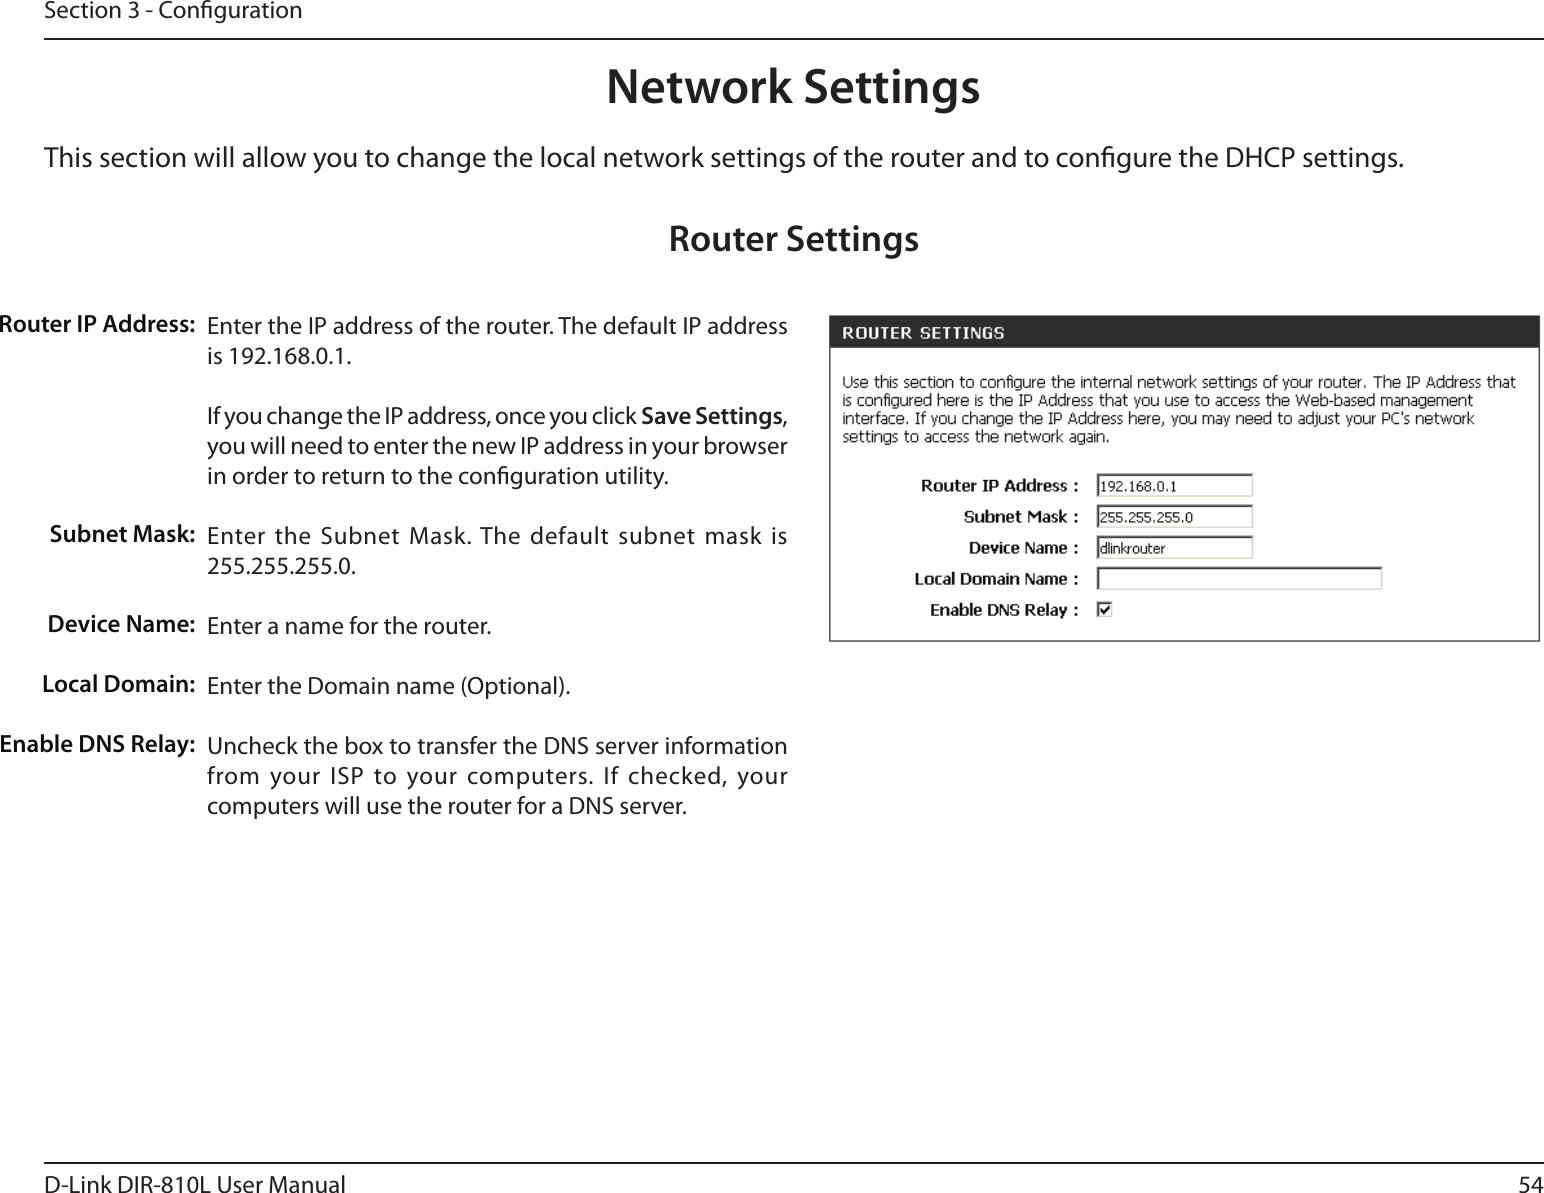 54D-Link DIR-810L User ManualSection 3 - CongurationThis section will allow you to change the local network settings of the router and to congure the DHCP settings.Network SettingsEnter the IP address of the router. The default IP address is 192.168.0.1.If you change the IP address, once you click Save Settings, you will need to enter the new IP address in your browser in order to return to the conguration utility.Enter the Subnet  Mask. The default  subnet mask is 255.255.255.0.Enter a name for the router.Enter the Domain name (Optional).Uncheck the box to transfer the DNS server information from your ISP to your computers. If  checked, your computers will use the router for a DNS server.Router IP Address:Subnet Mask:Device Name:Local Domain:Enable DNS Relay:Router Settings